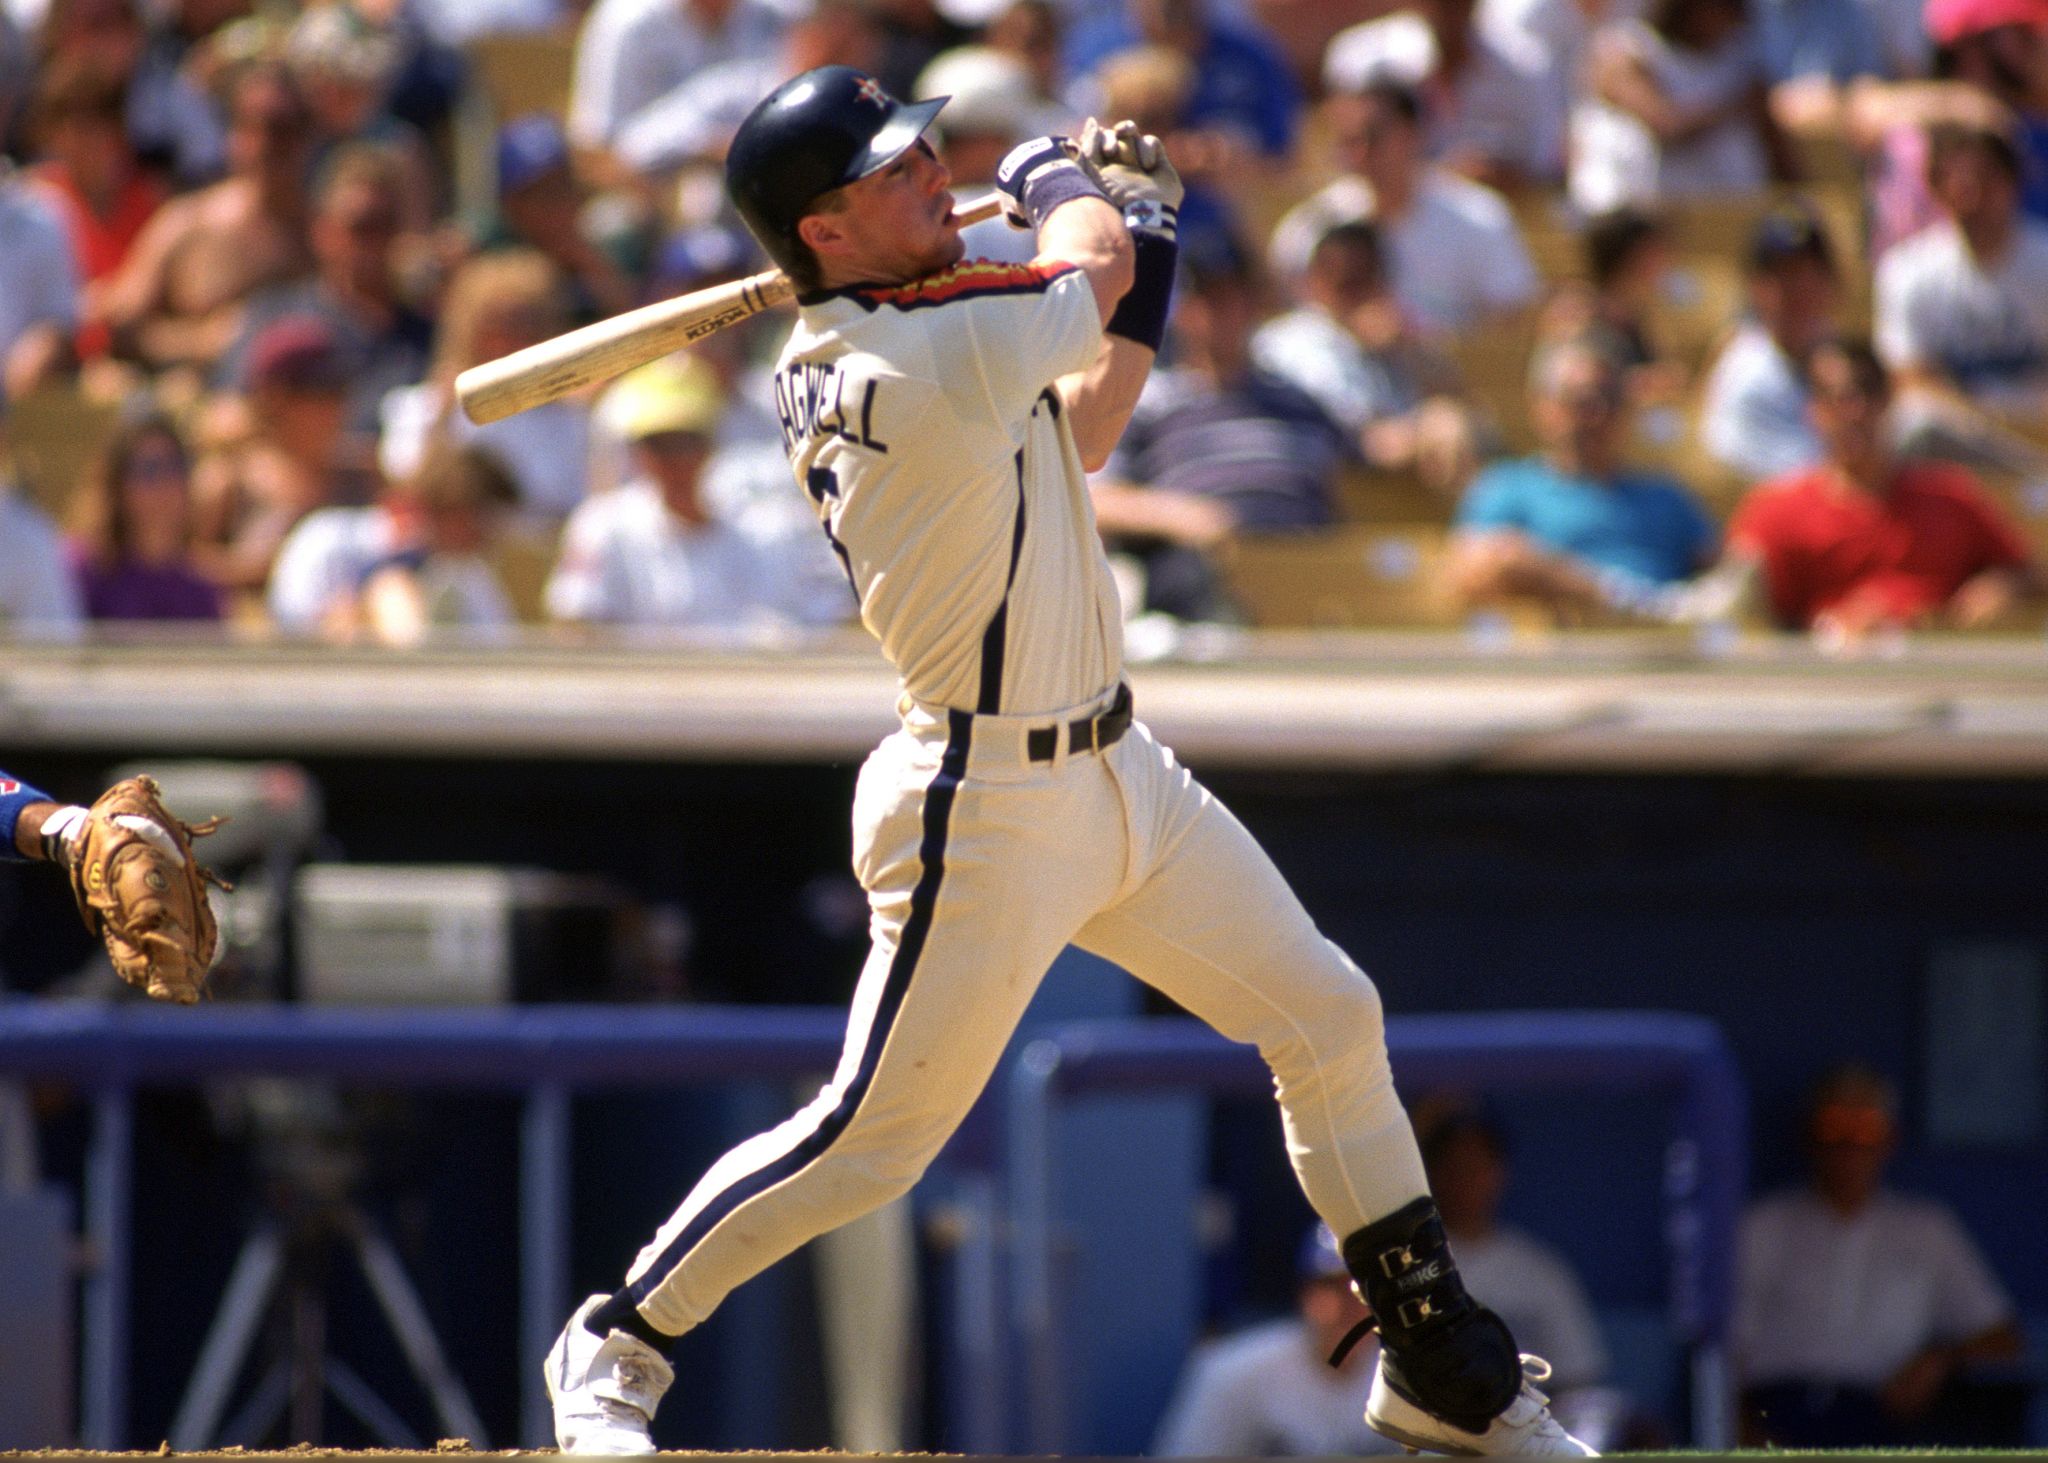 Astros flashback: Jeff Bagwell's major-league debut